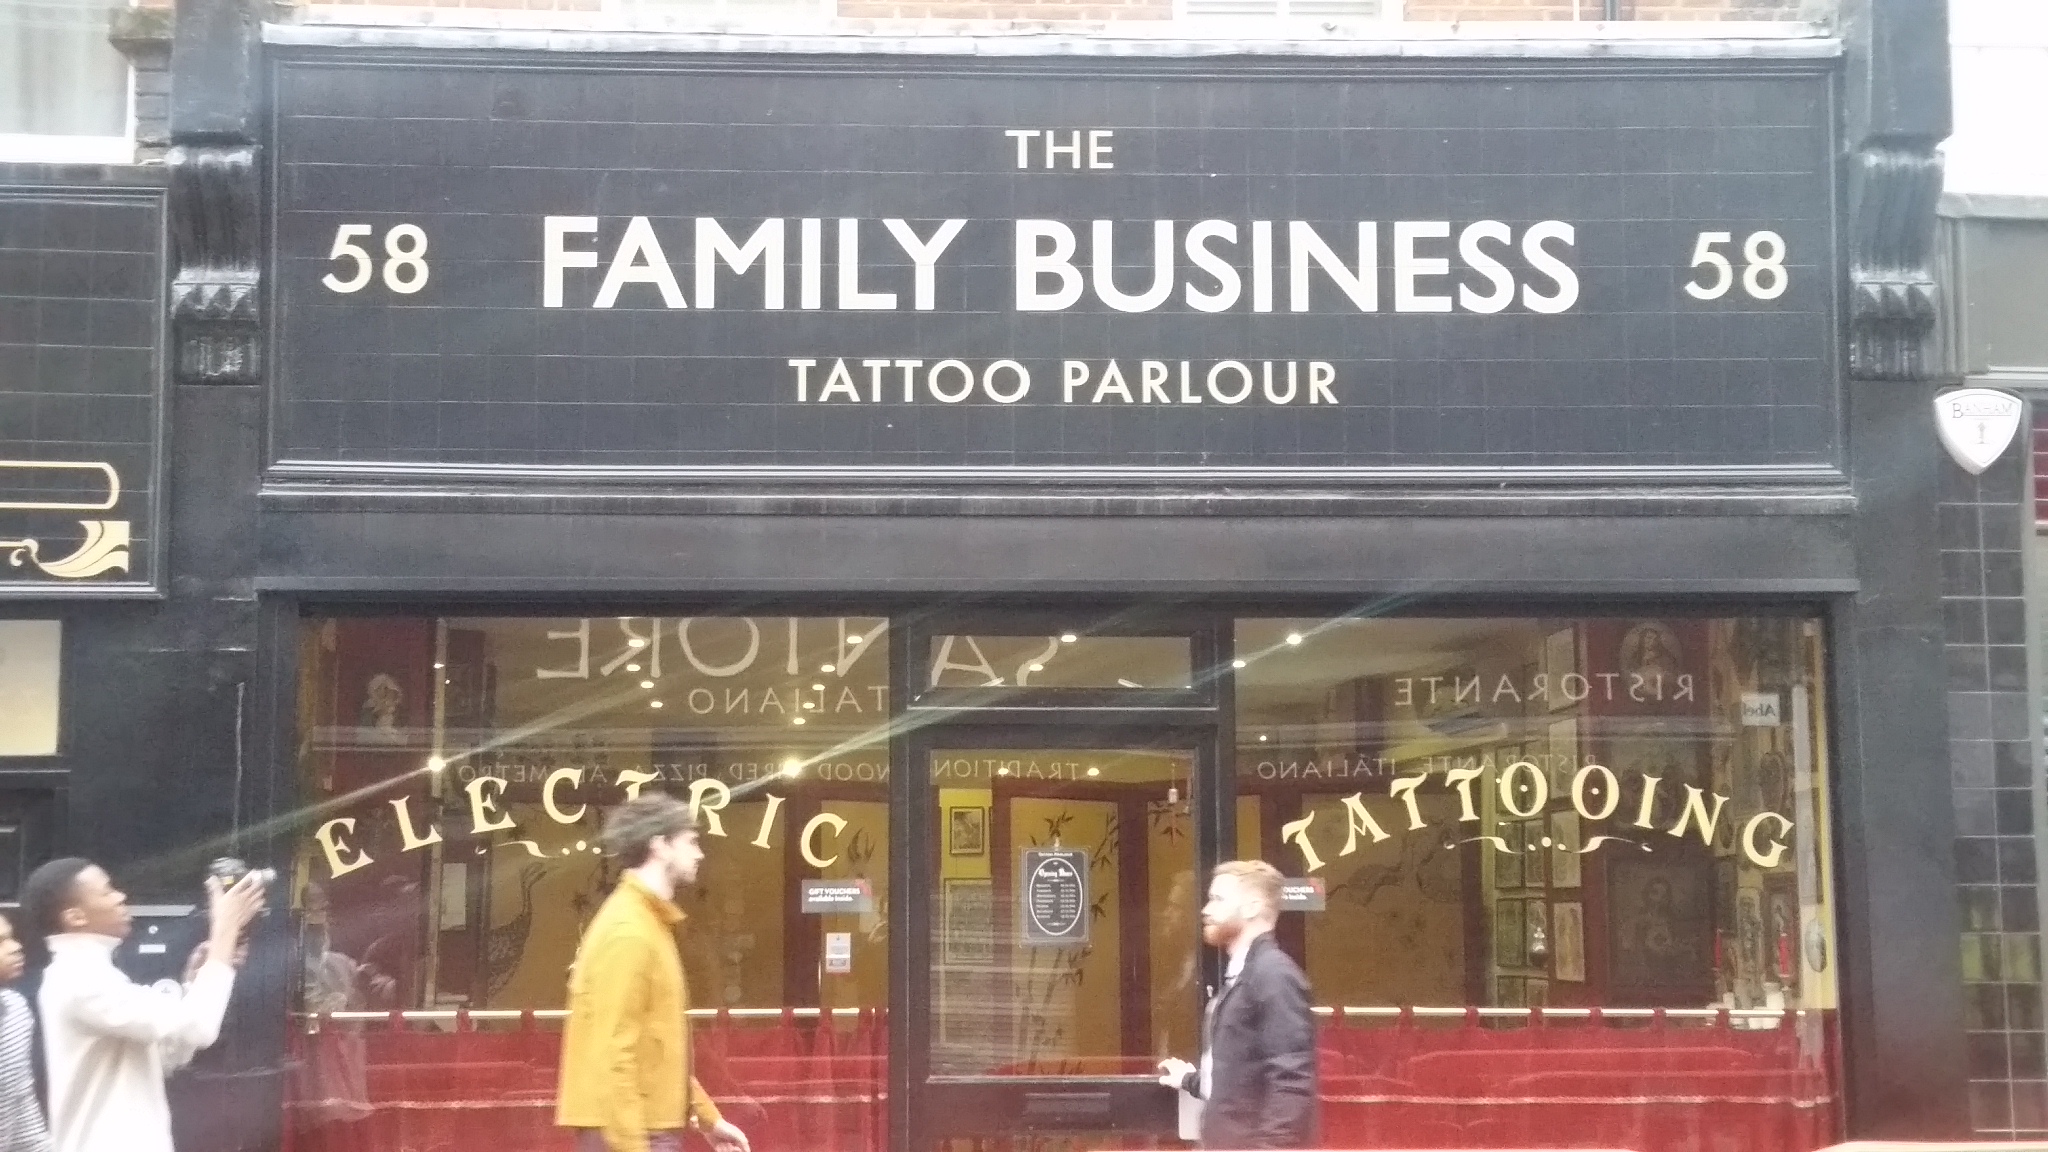 Topman Tattoo Battle with the Family Business